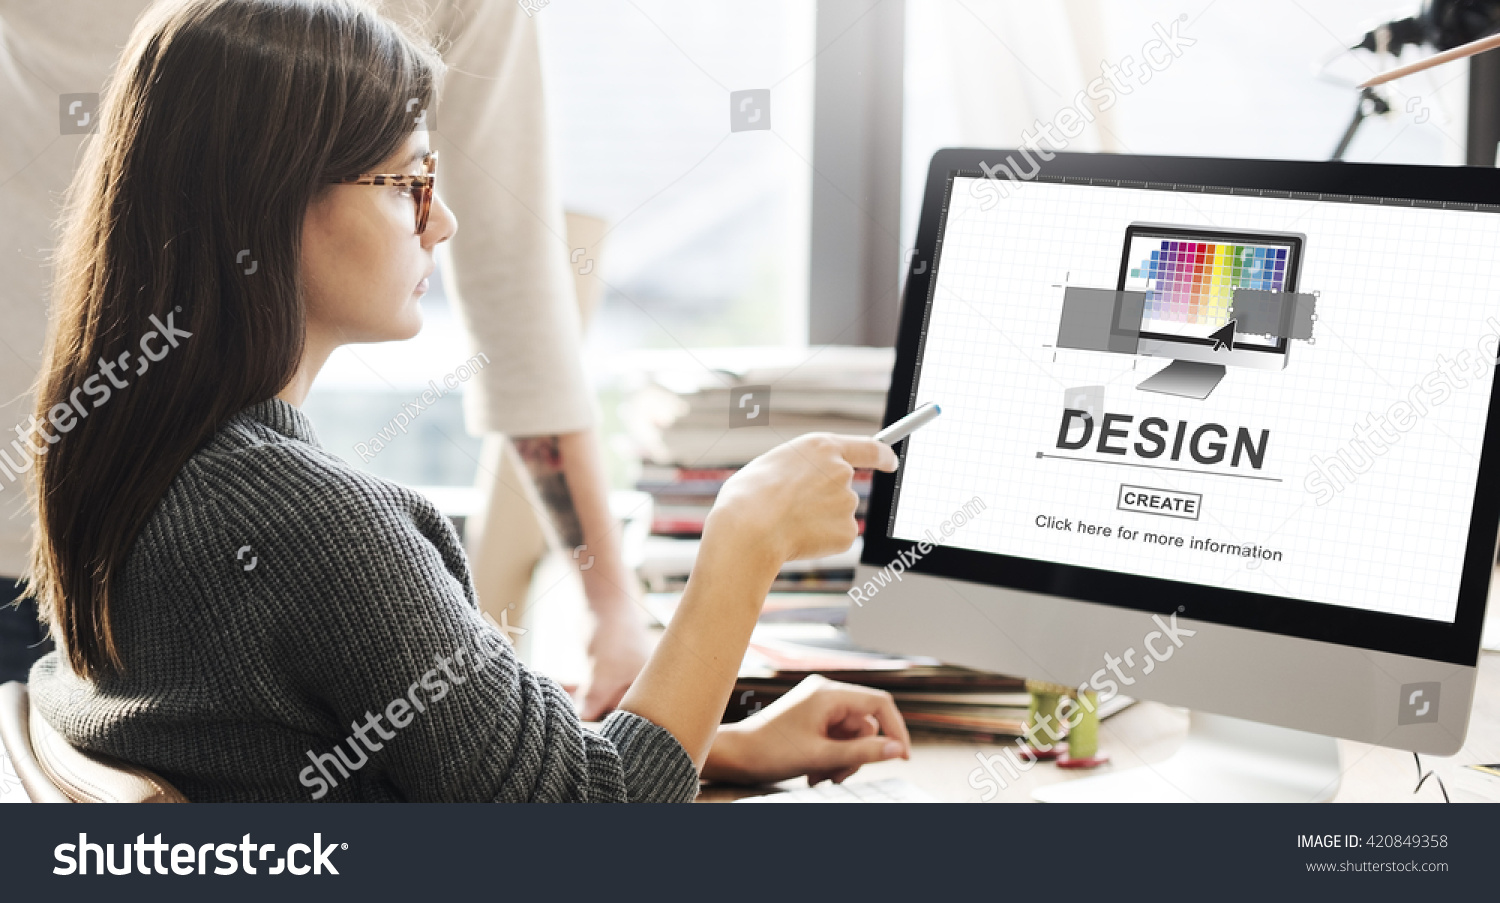 Design Layout Computer Software Interface Concept #420849358